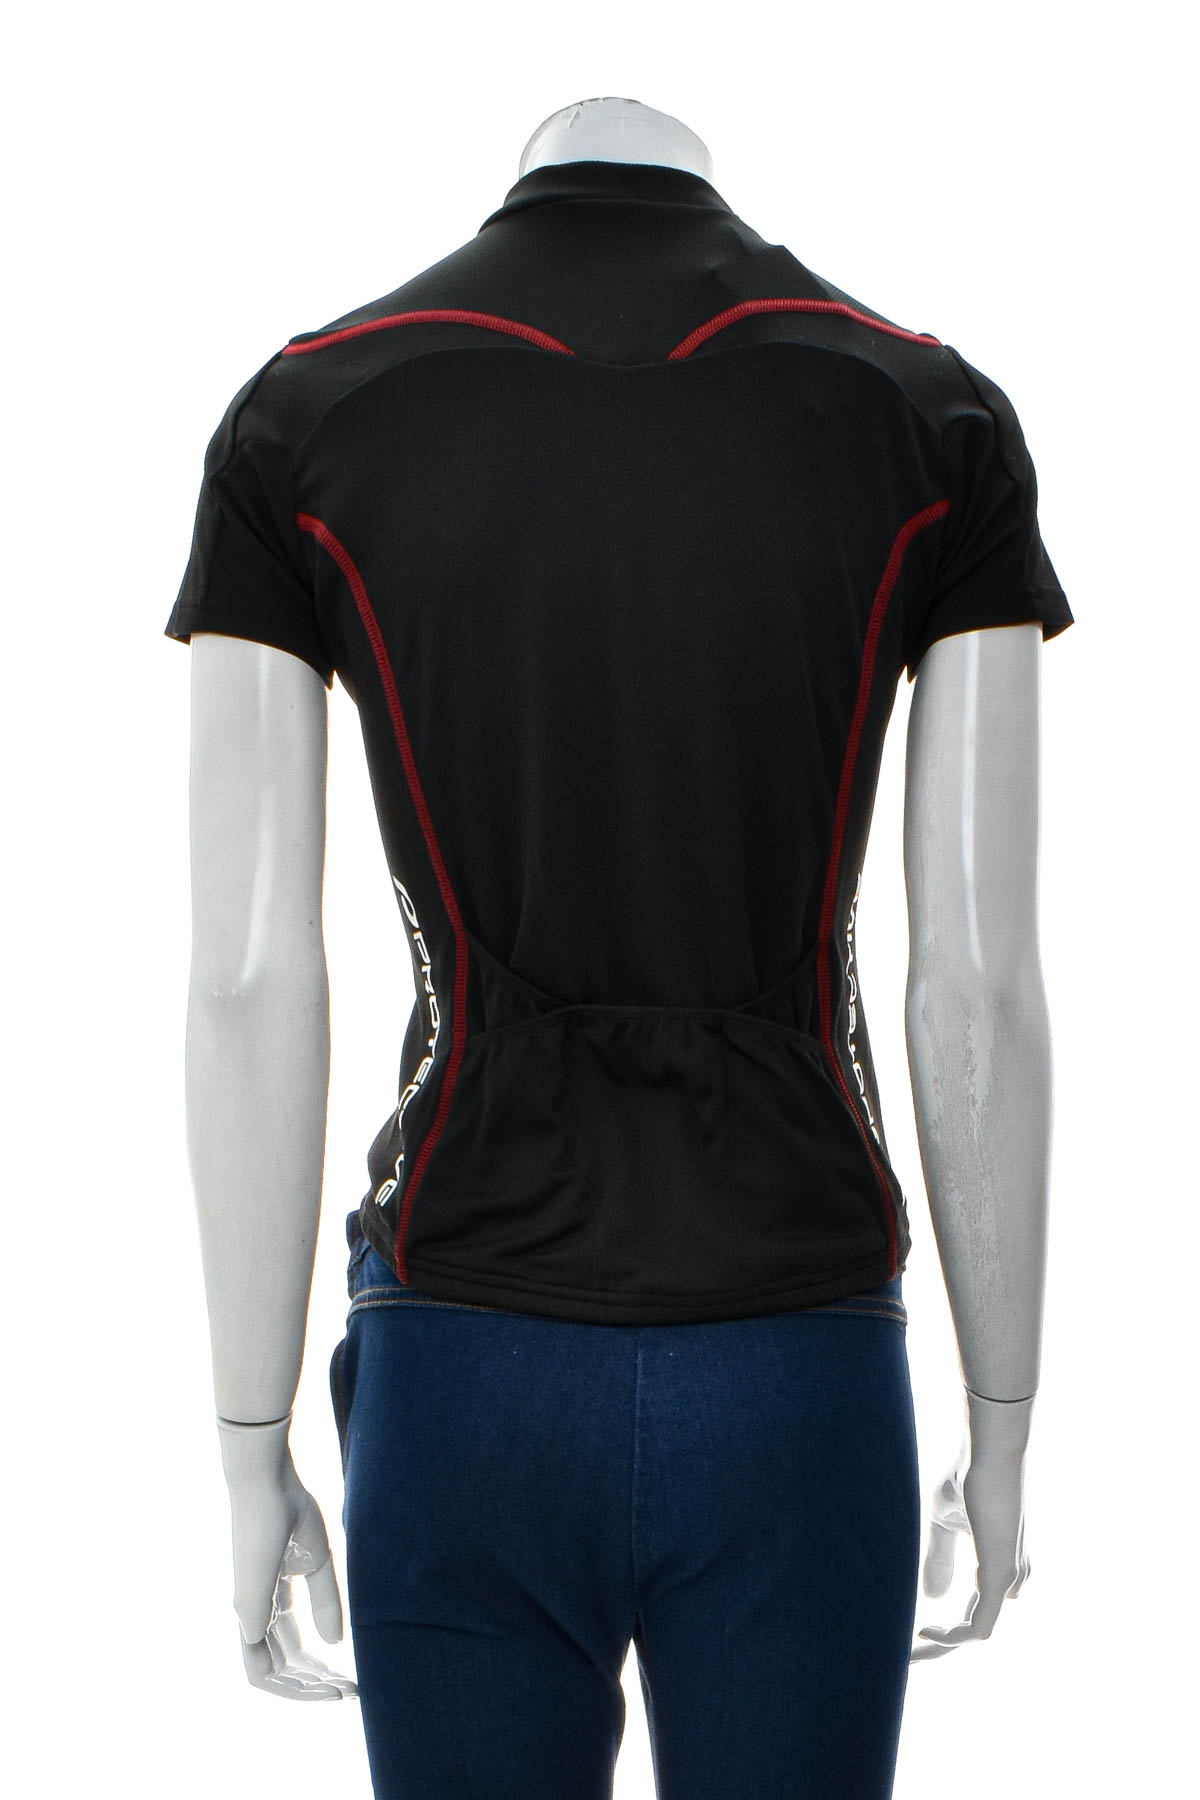 Women's t-shirt for cycling - PROTECTIVE - 1